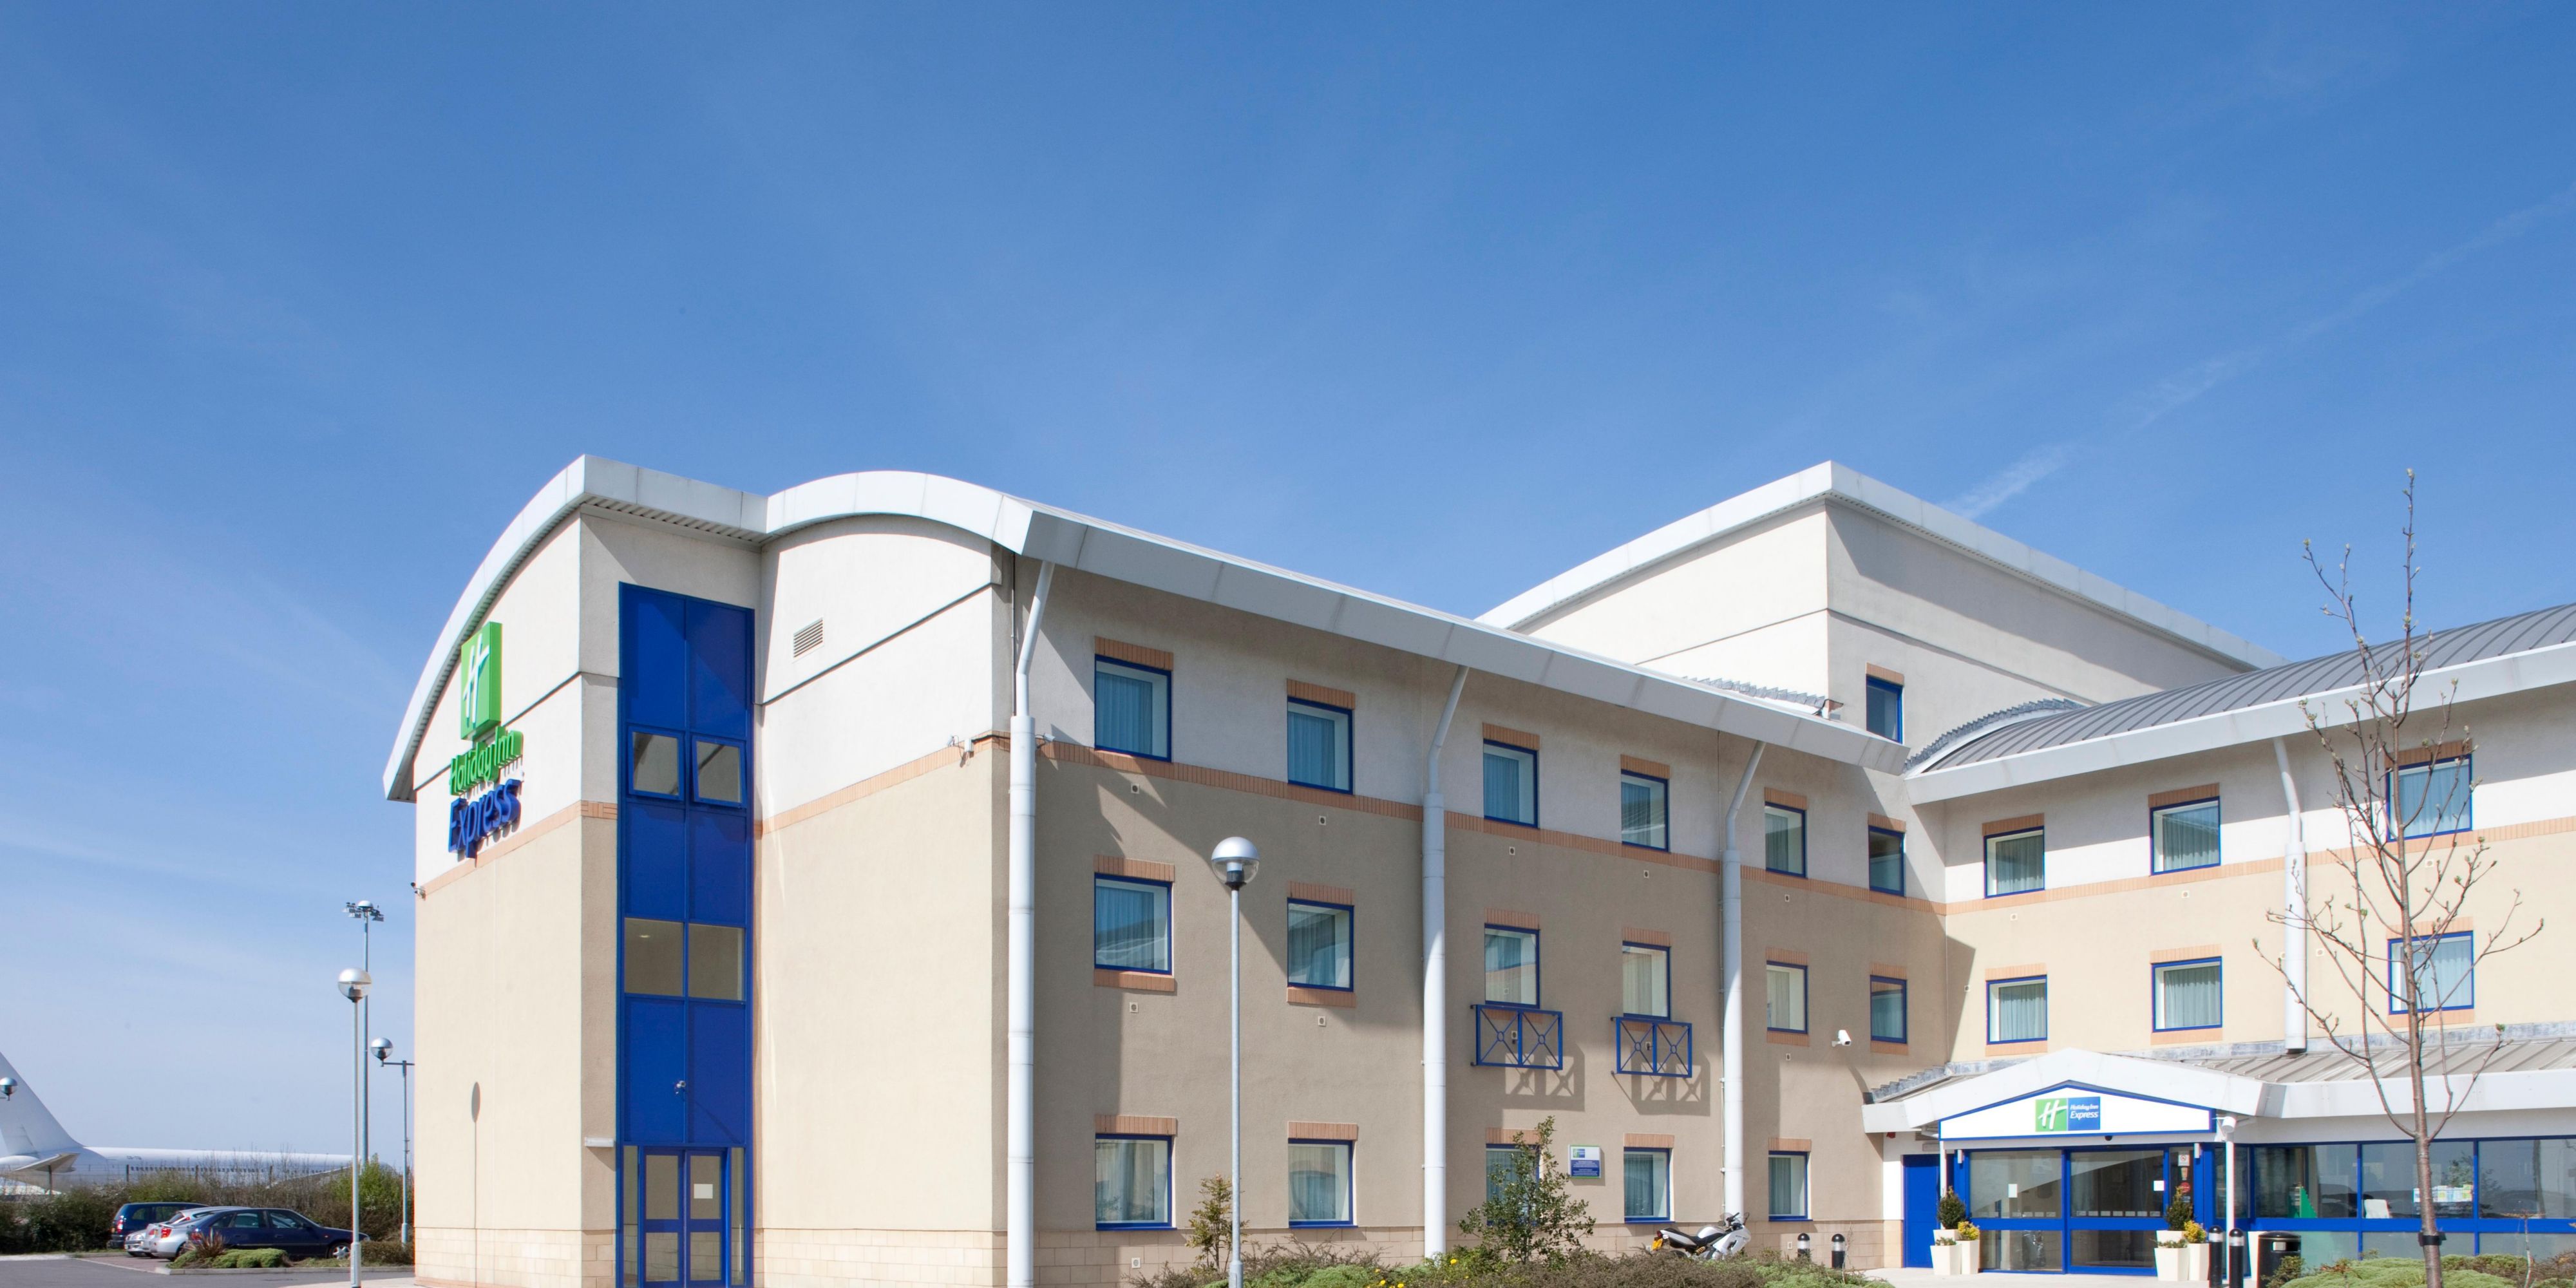 Here at the Holiday Inn Express Cardiff Airport we welcome groups big or small. With 111 bedrooms to offer we can comfortably accommodate larger groups. We offer competitive rates including breakfast. We can also cater for group dinners. Complimentary coach parking is available for all groups.